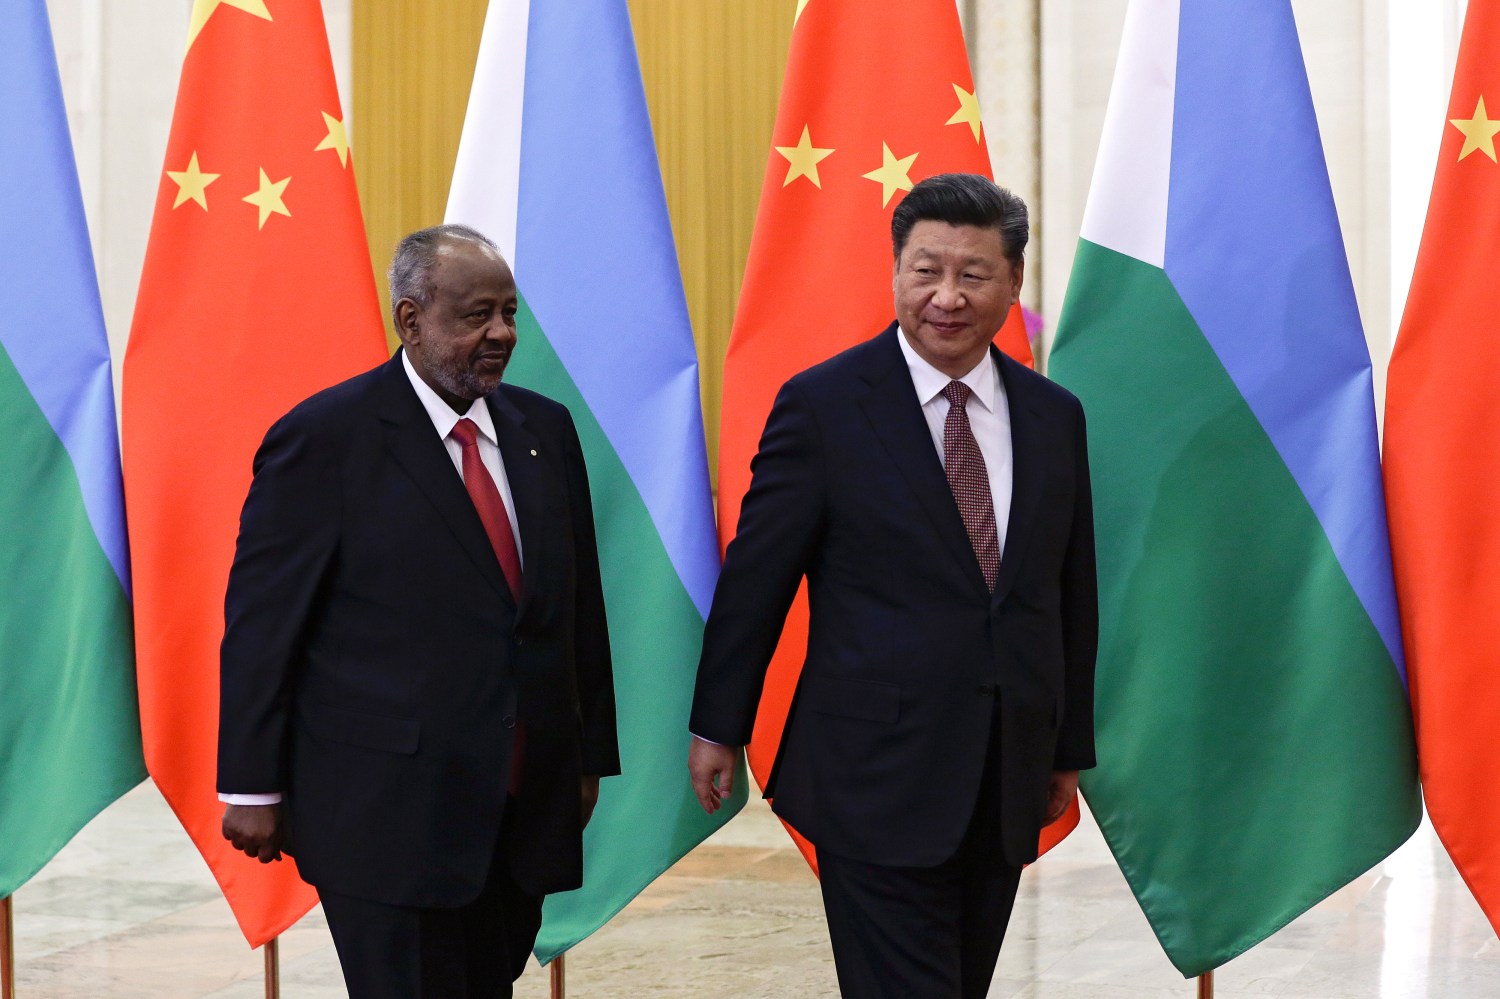 Djibouti's President Ismail Omar Guelleh and China's President Xi Jinping walk to their bilateral meeting at the Great Hall of the People in Beijing, China September 2, 2018. Andy Wong/Pool via REUTERS   *** Local Caption *** Abdel Fattah al-Sisi;Li Keqiang